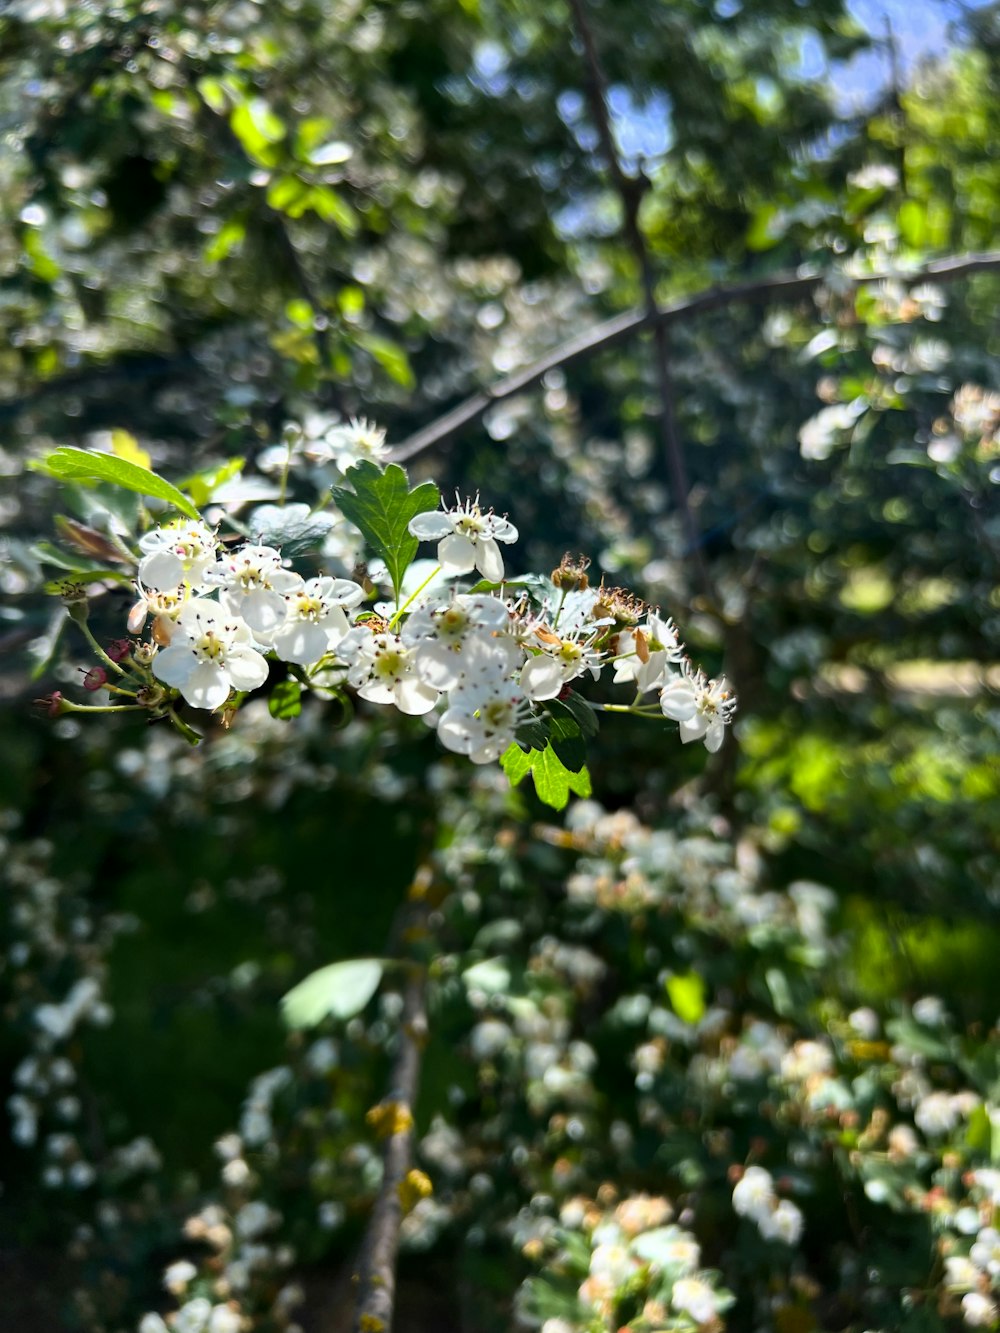 a branch with white flowers and green leaves